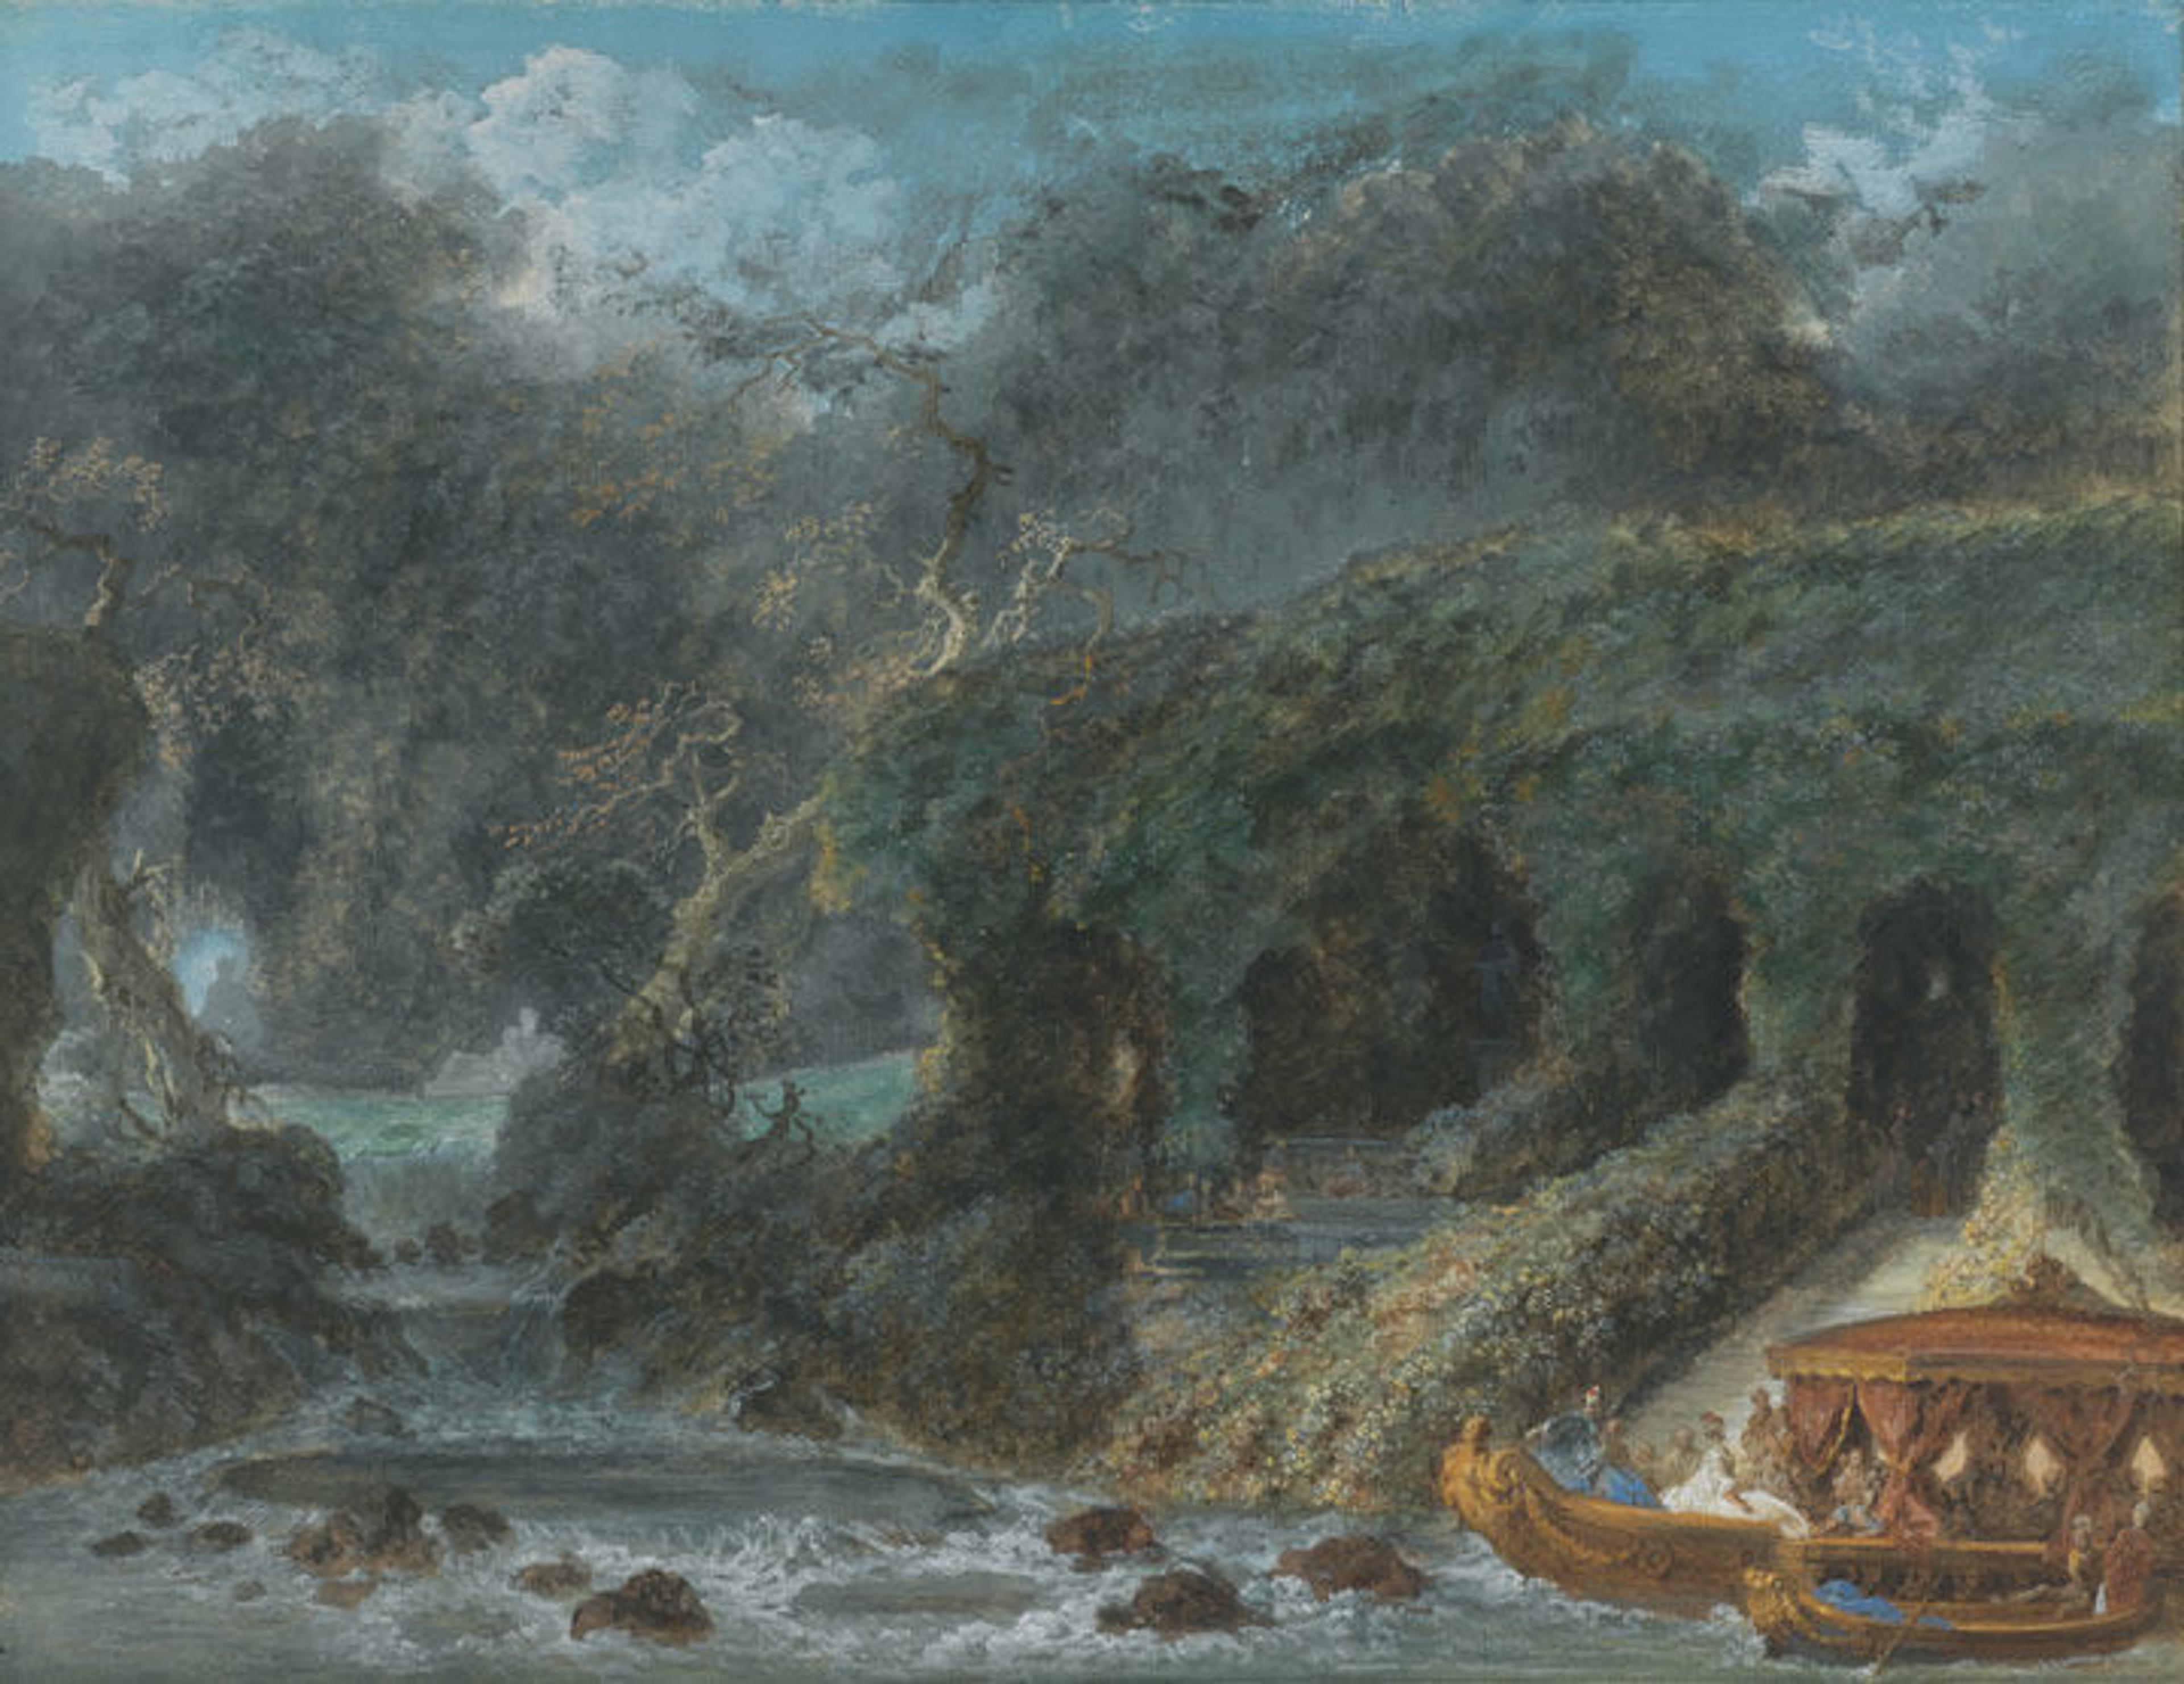 Black chalk and gouache drawing of a group of people approacing a dark, atmospheric island on a gilded 18th-century Venetian boat